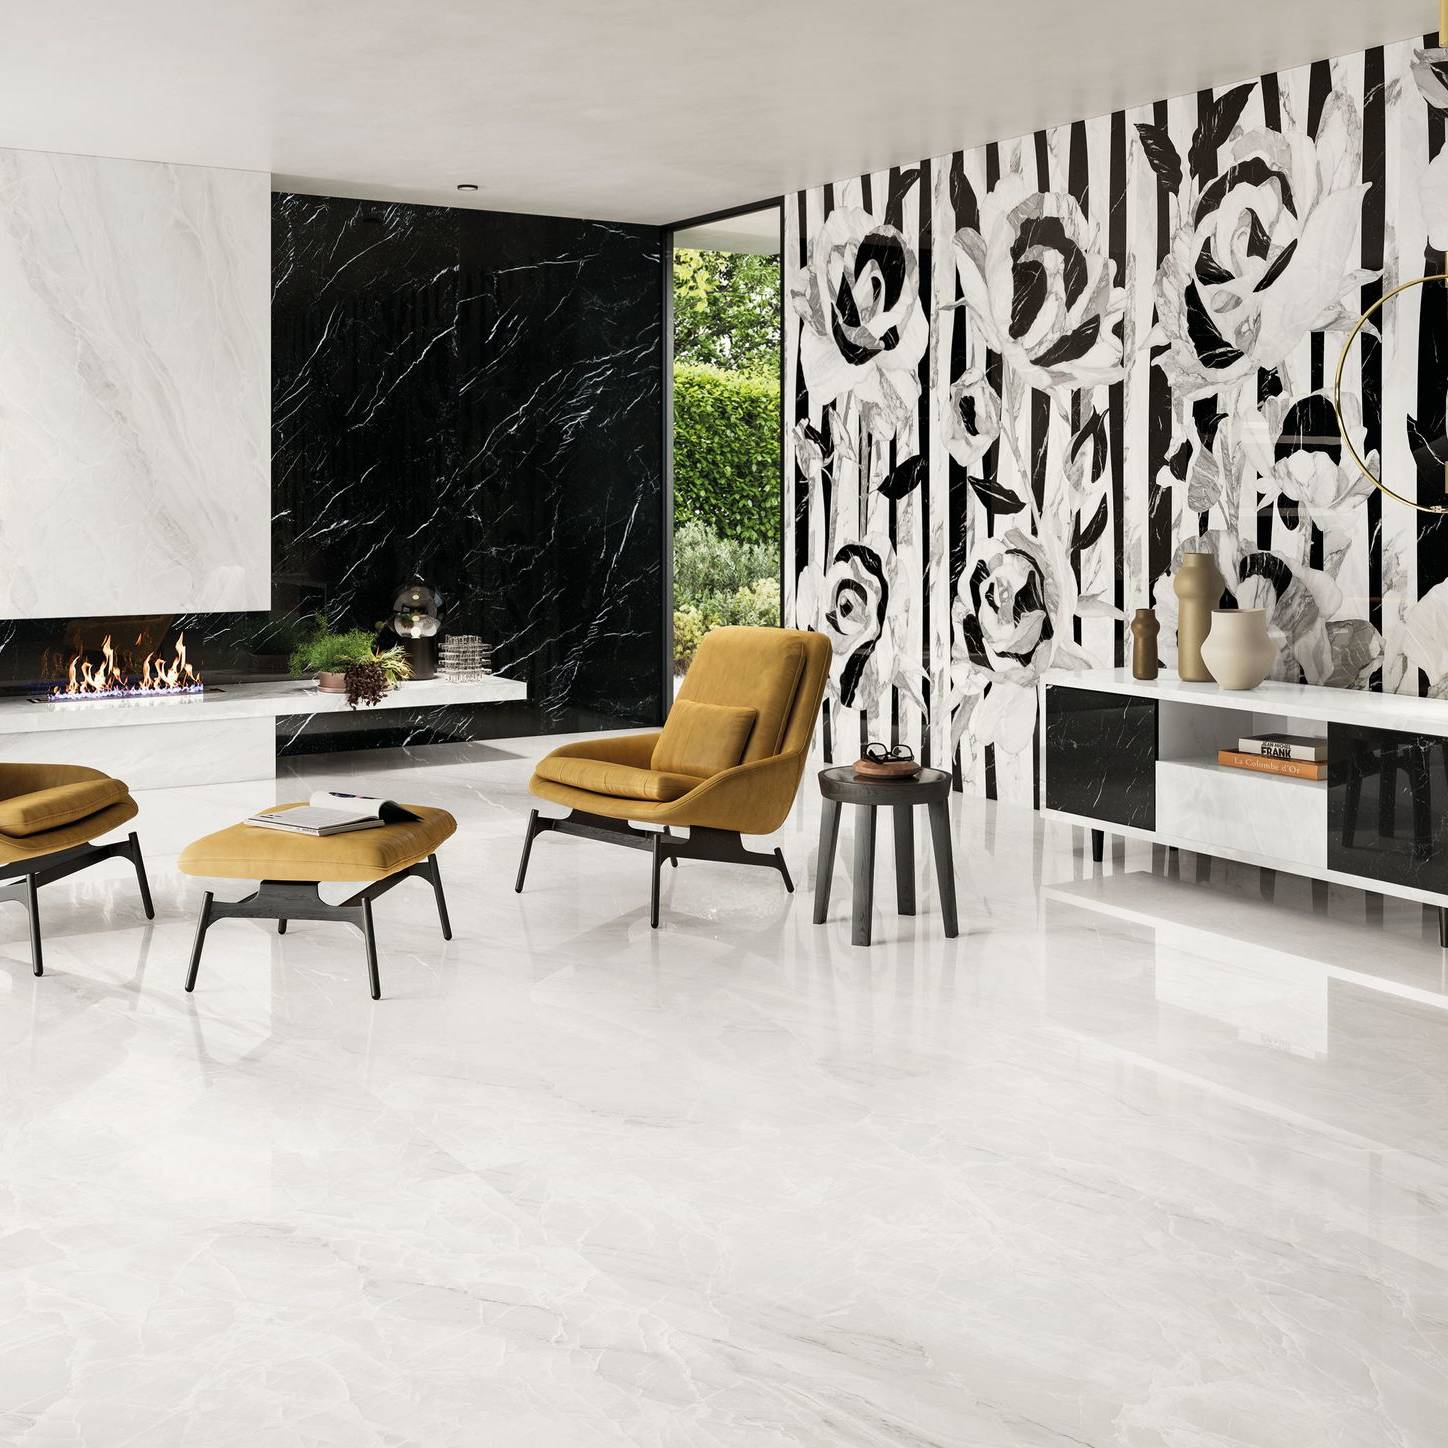 Selection 7 | Stones And More | Finest selection of Mosaics, Glass, Tile and Stone